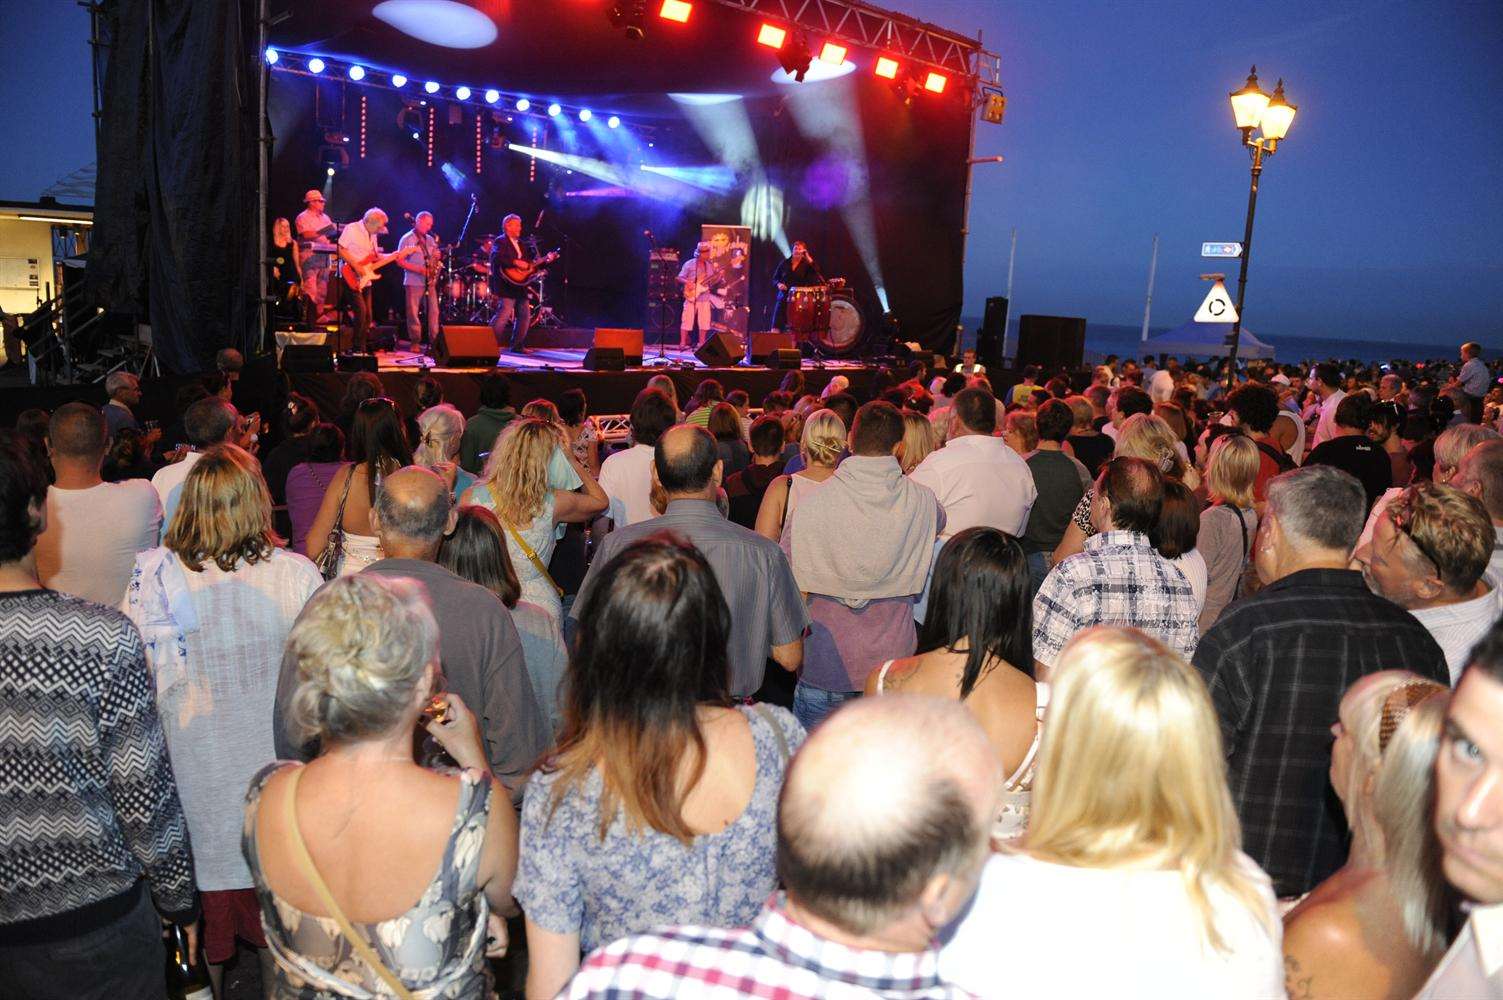 The Party on the Prom is always popular. This year The Kingsdown Band and Bad Penny will play